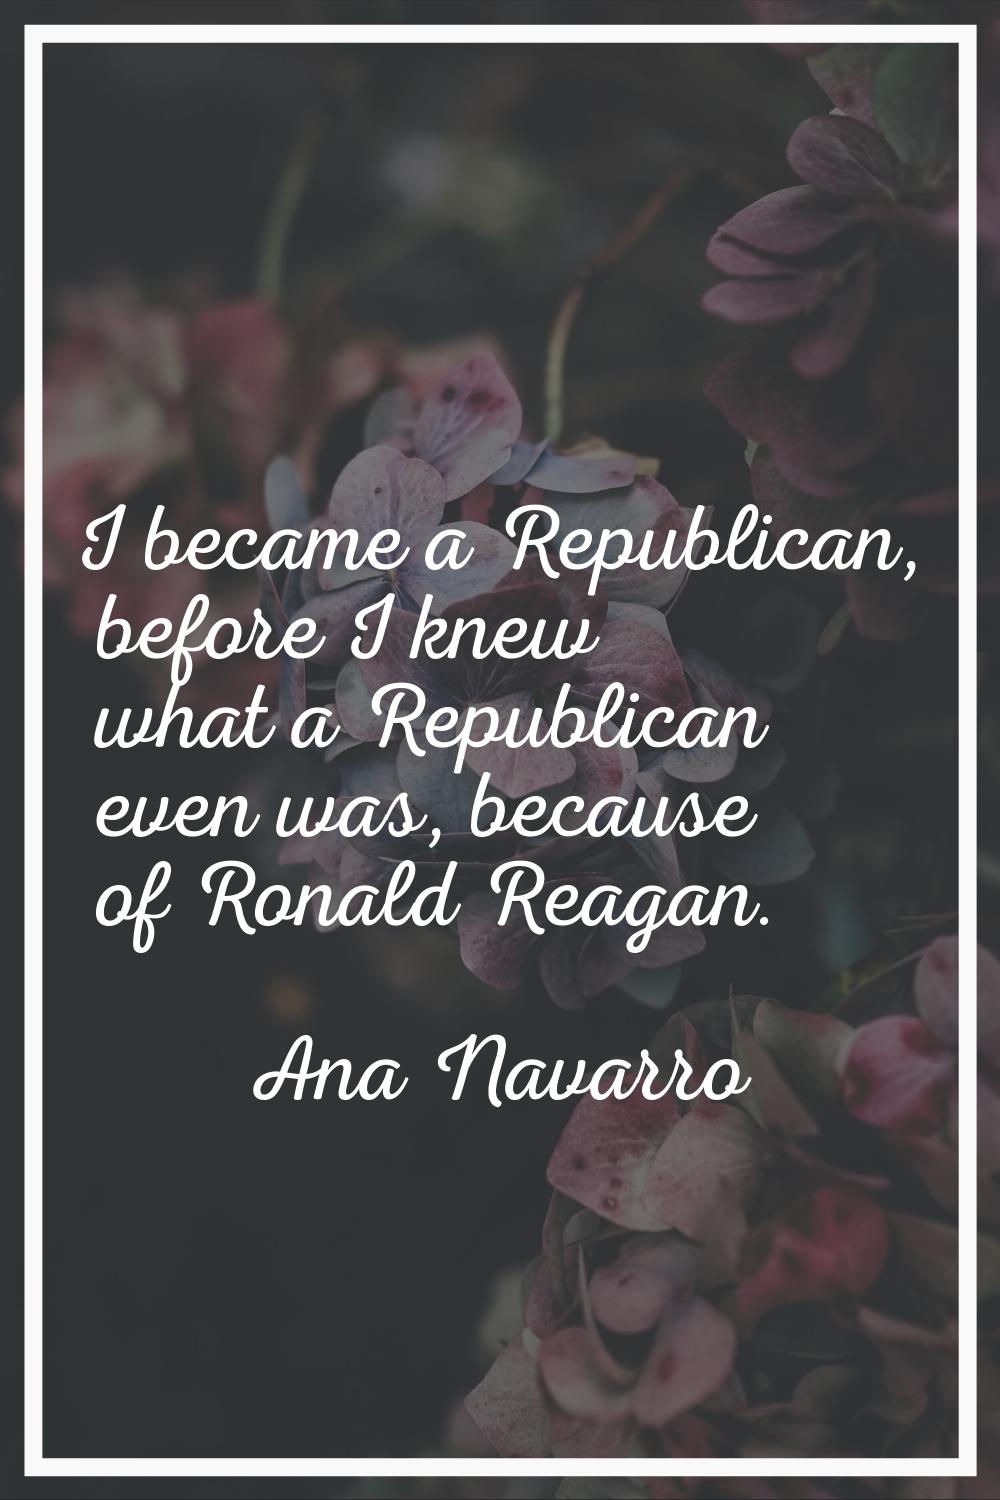 I became a Republican, before I knew what a Republican even was, because of Ronald Reagan.